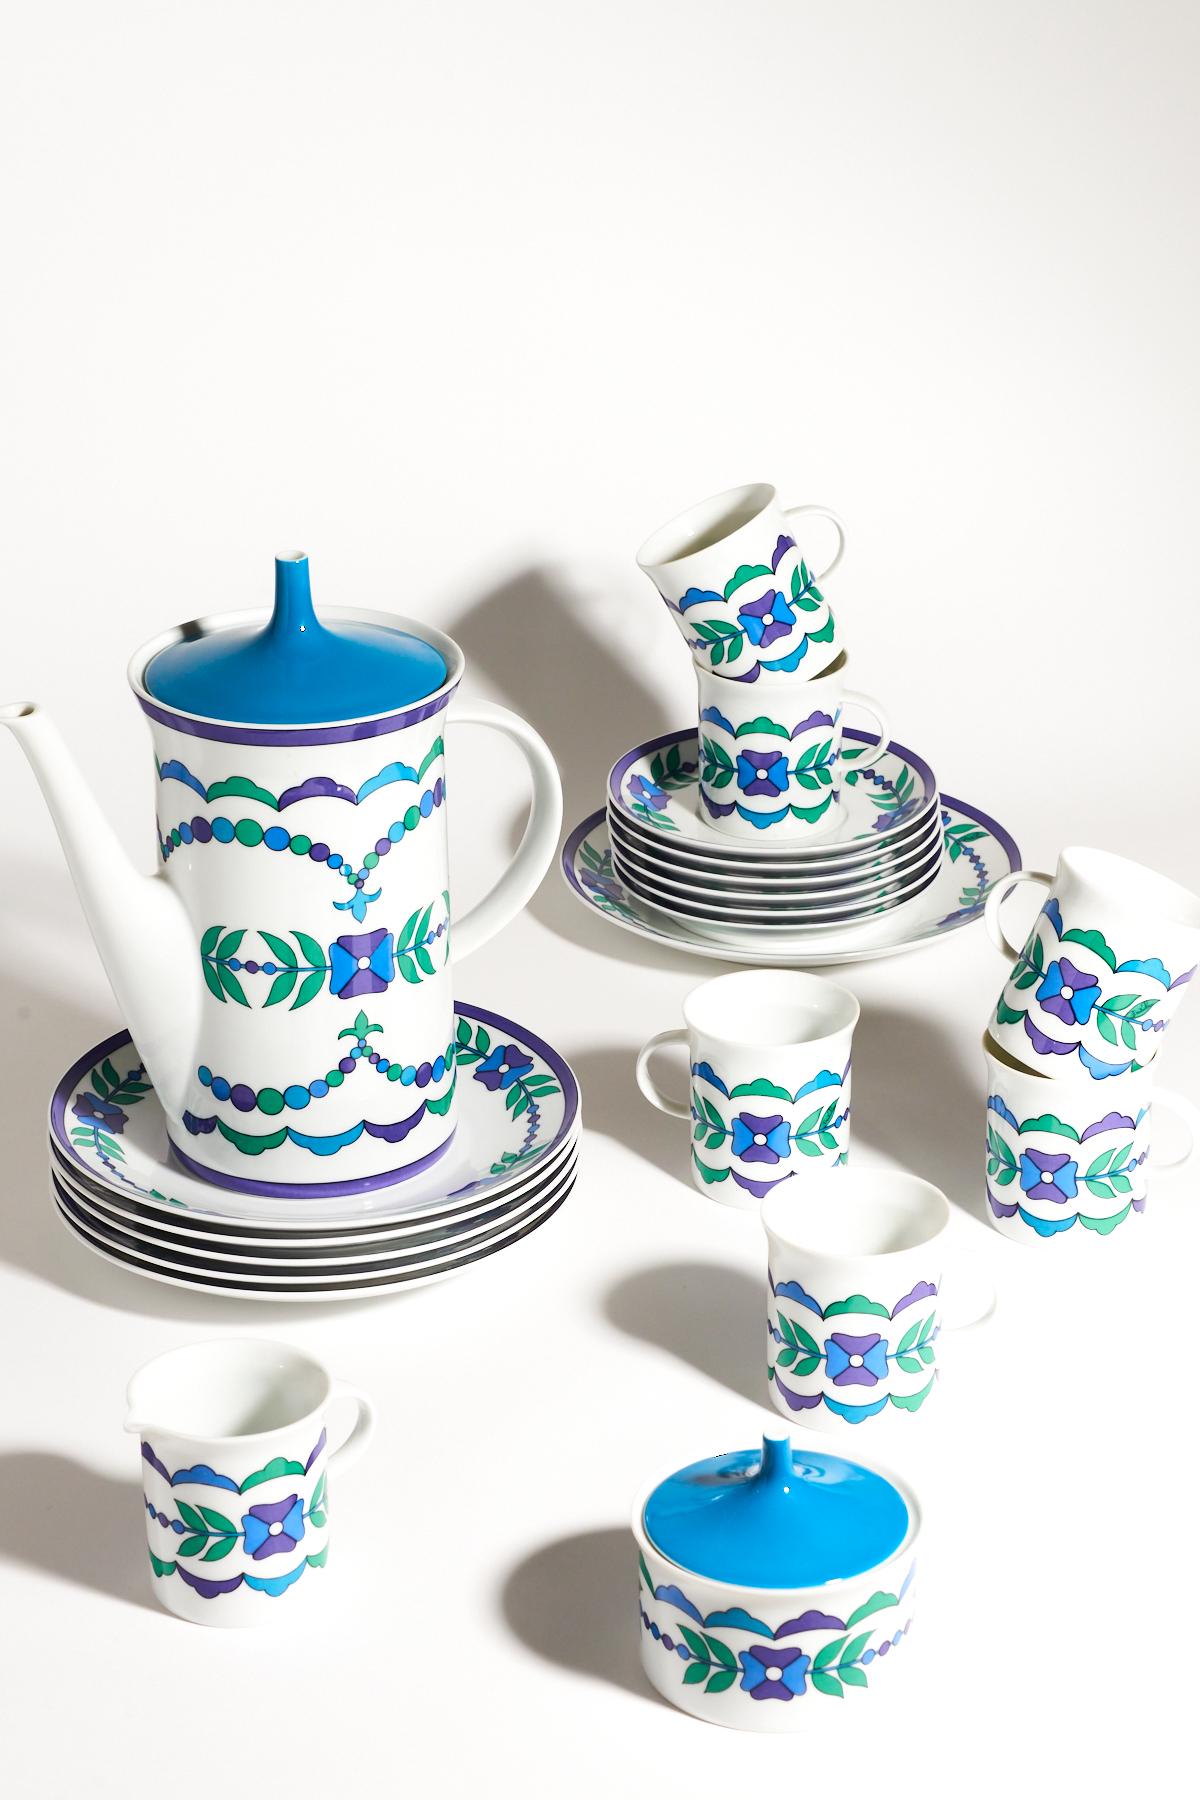 Beautiful Pucci design porcelain coffee set including tall pot with peacock blue lid, sugar bowl with similar lid, creamer and six cup, saucer and plate sets, stylised floral pattern in peacock blue, green, sky blue and violet on crisp white, signed